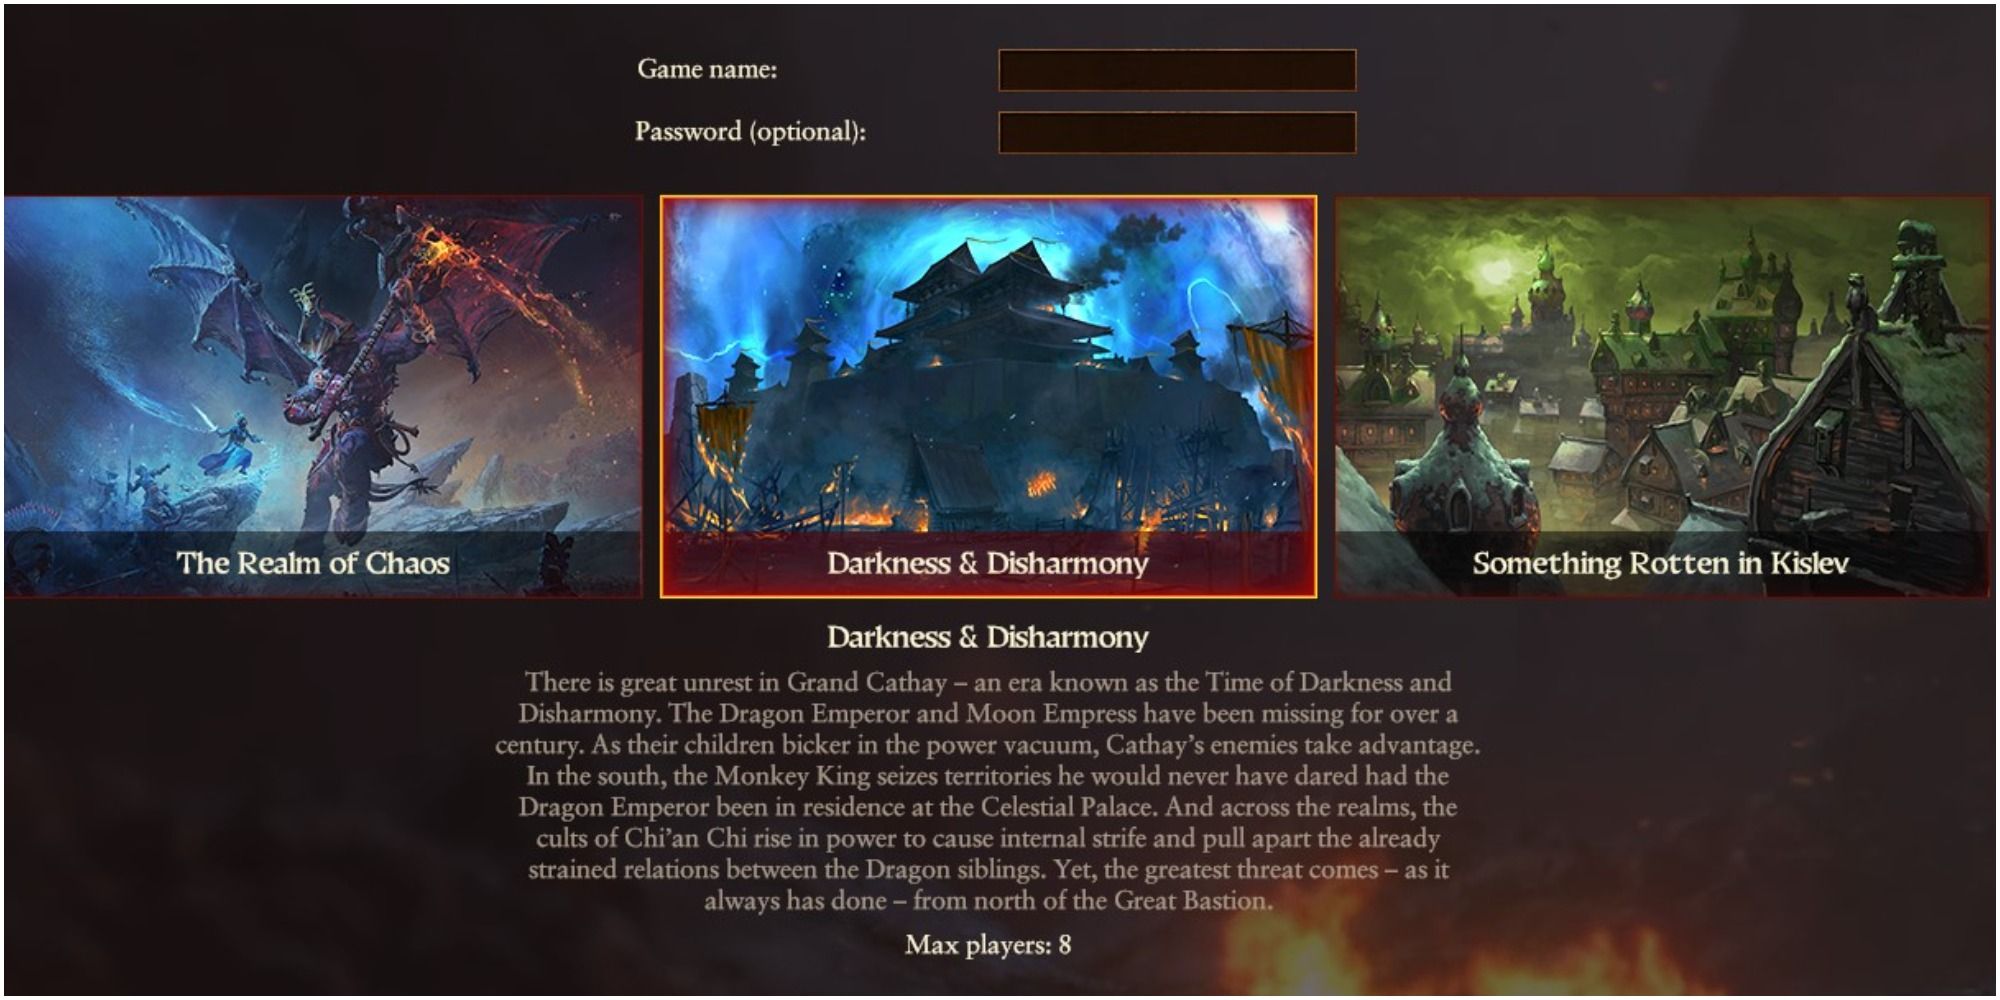 Darkness and Disharmony Multiplayer Campaign Selection Total War Warhammer 3